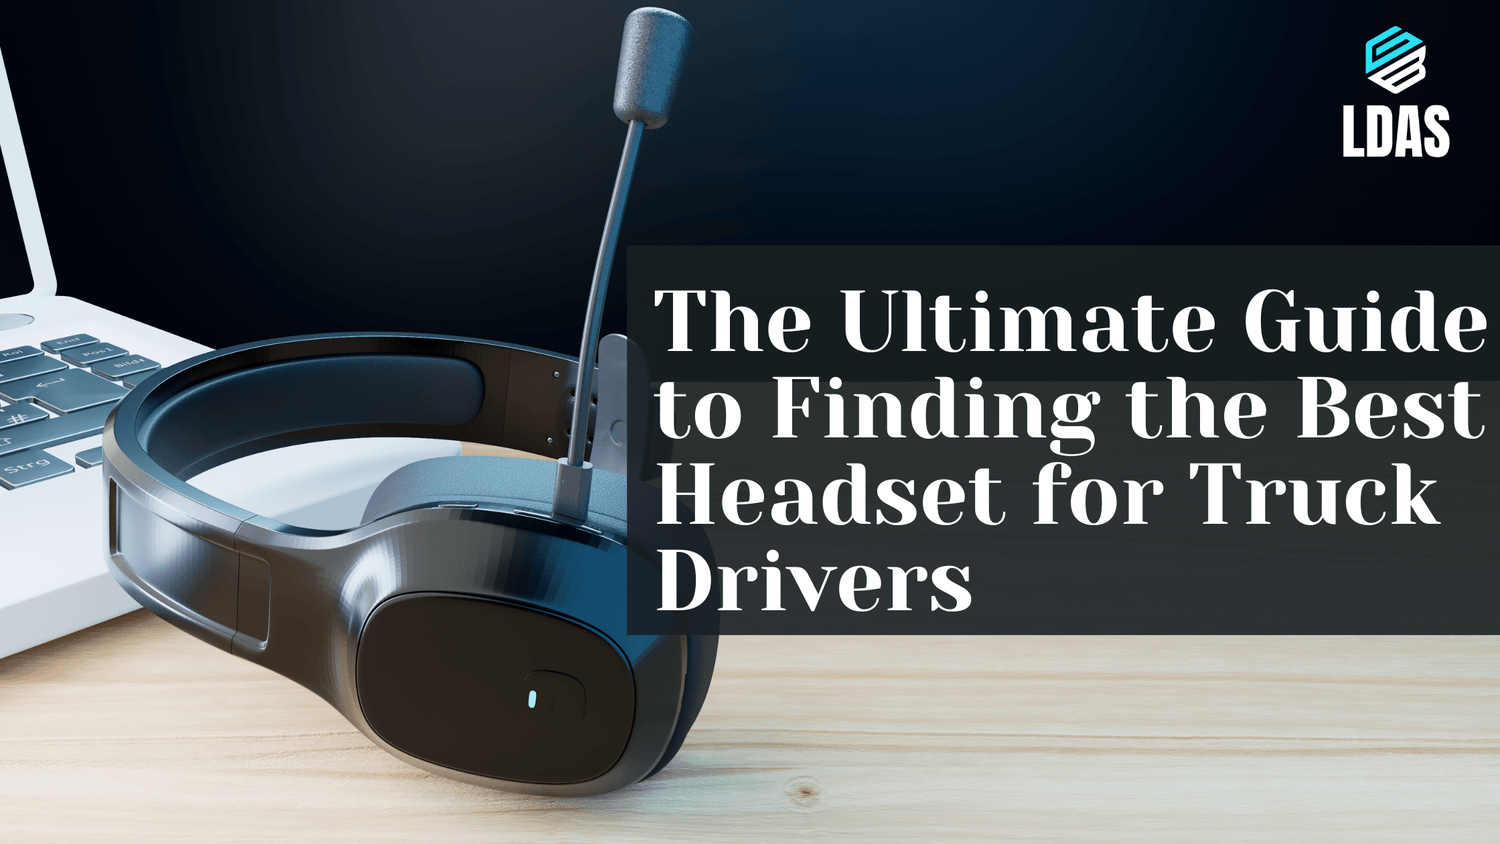 The Ultimate Guide to Finding the Best Headset for Truck Drivers - LDAS ELECTRONICS